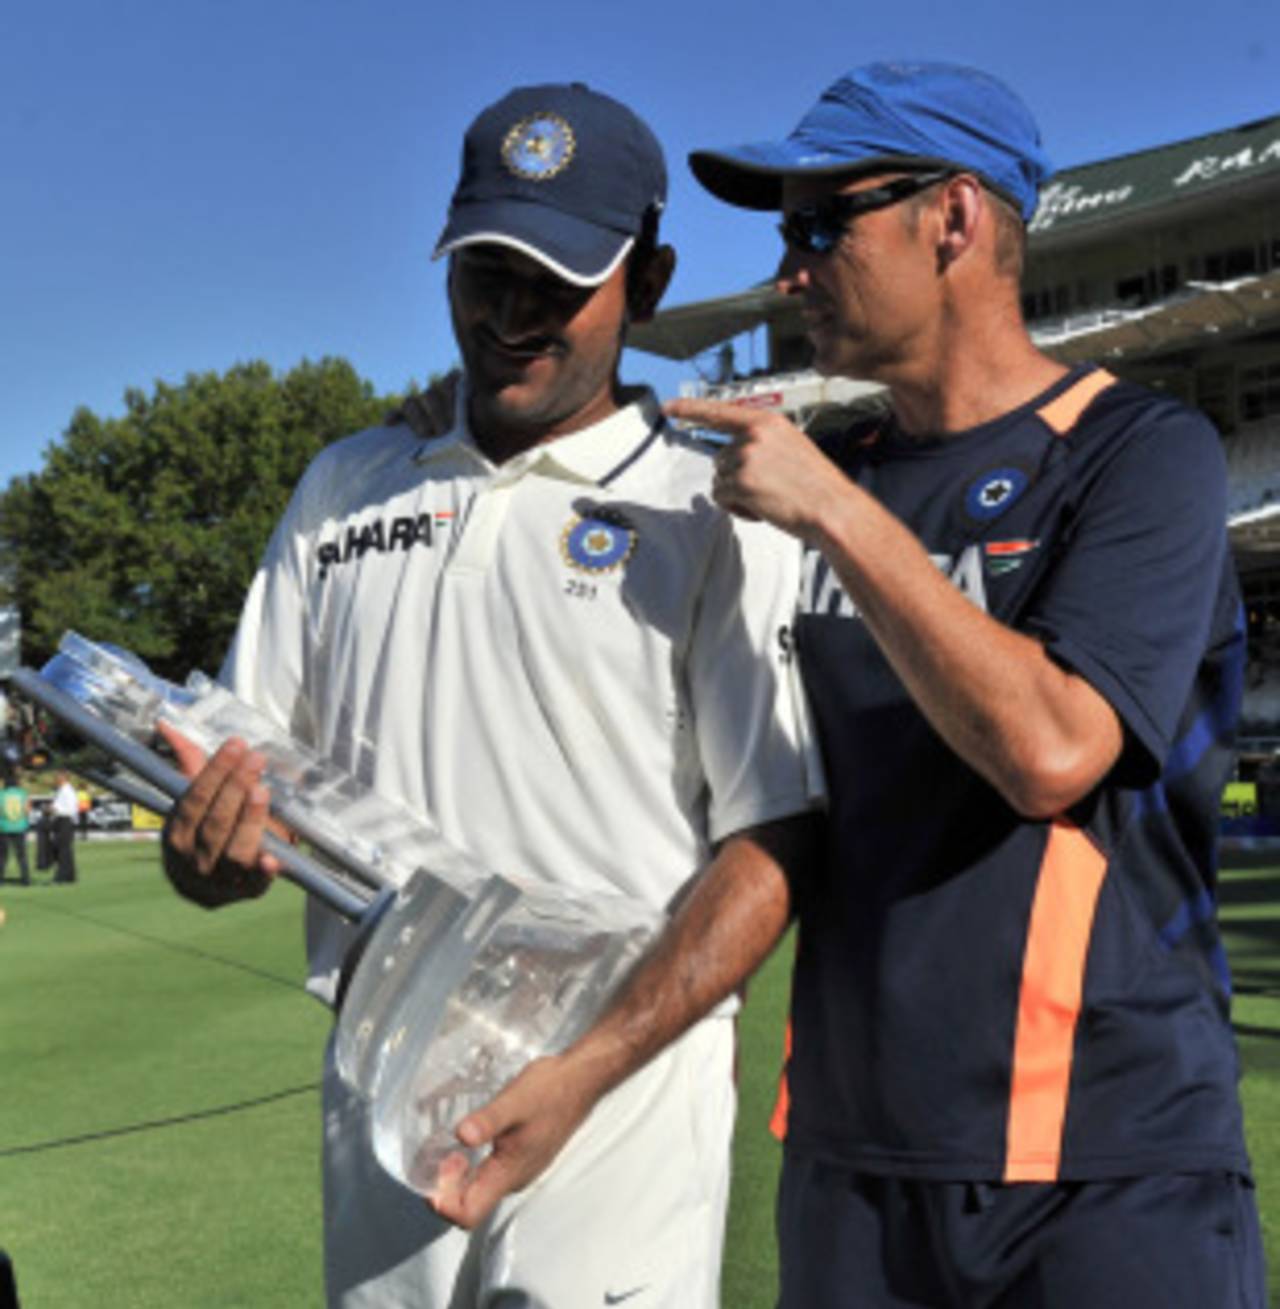 Gary Kirsten talks to MS Dhoni after what could be his last Test as coach of India, South Africa v India, 3rd Test, Cape Town, 5th day, January 6, 2011